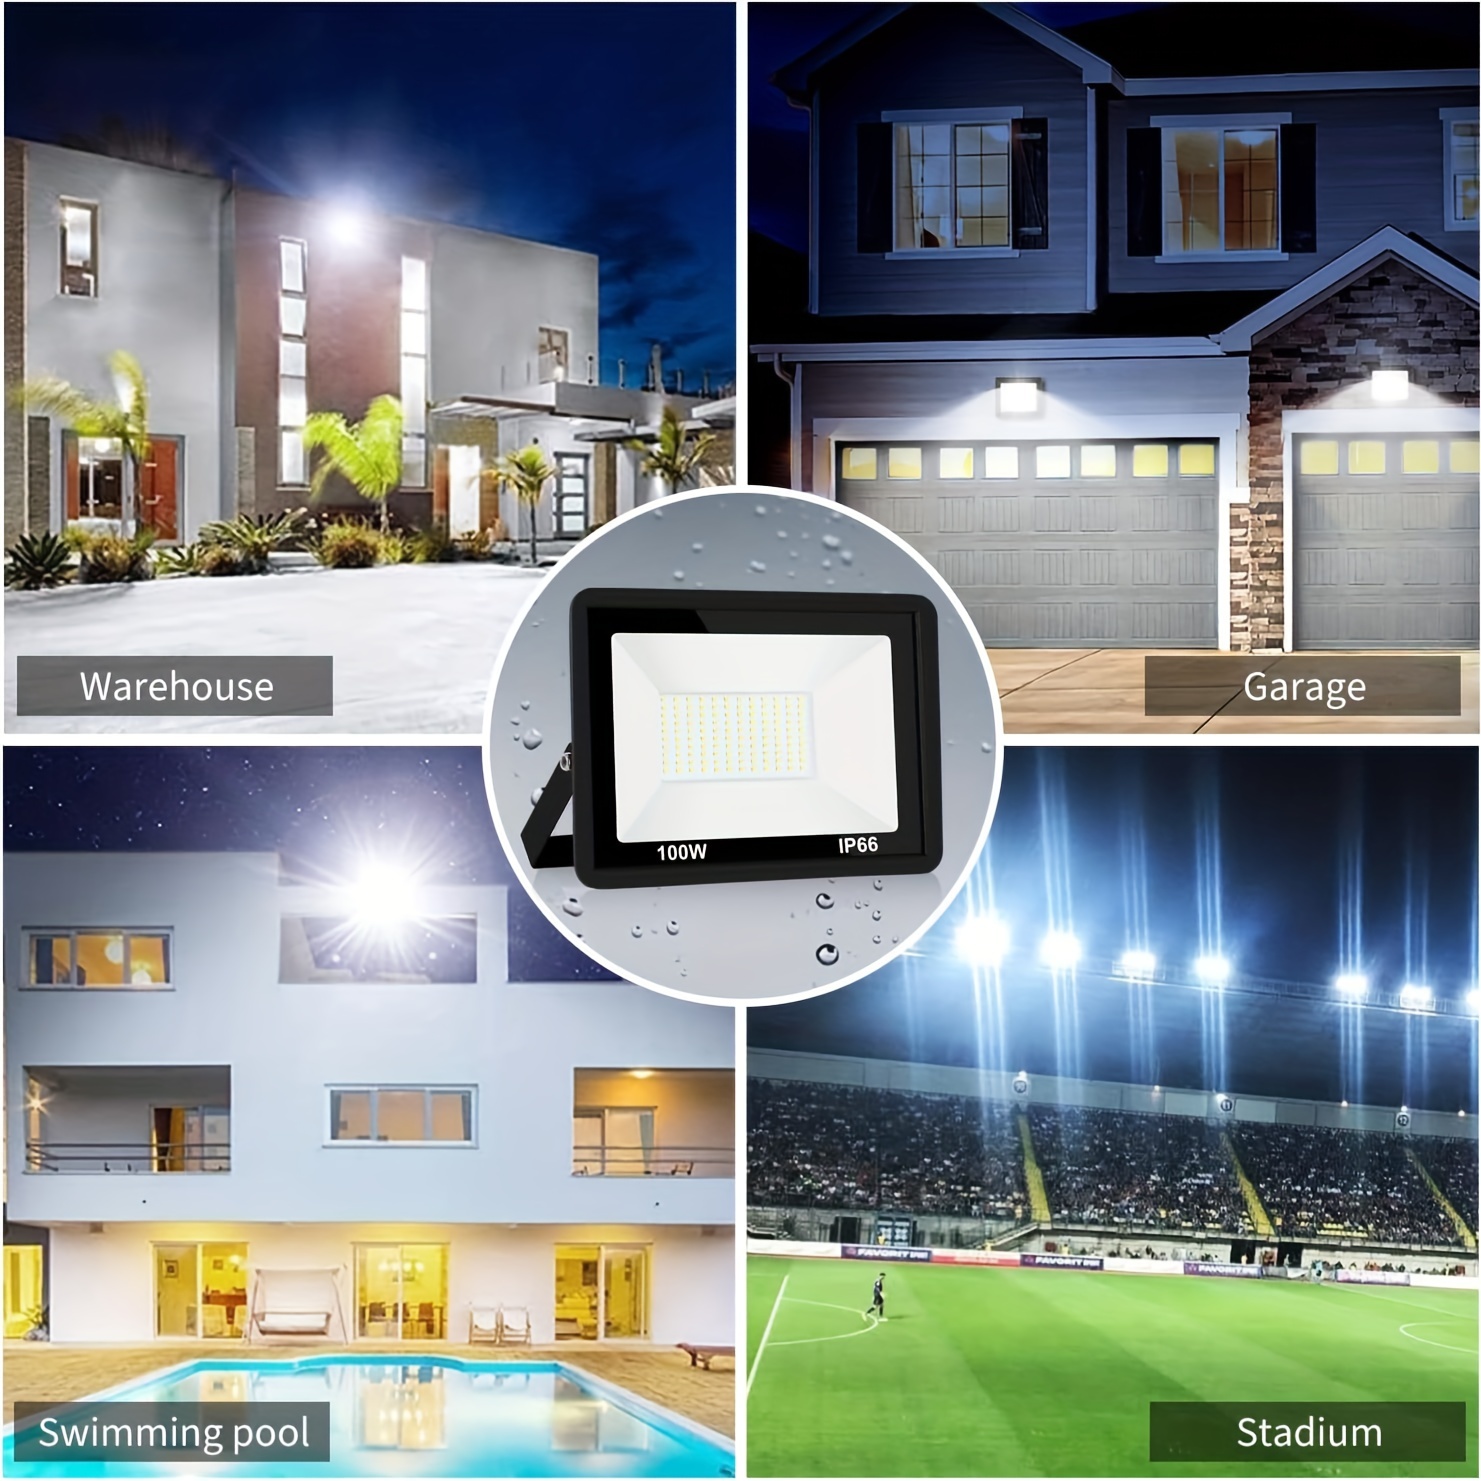 stadium garage playground-1 pack 100w led flood light outdoor floodlight fixture with plug in ip 66 waterproof led work light 6500 k security light for yard garden stadium garage playground details 4